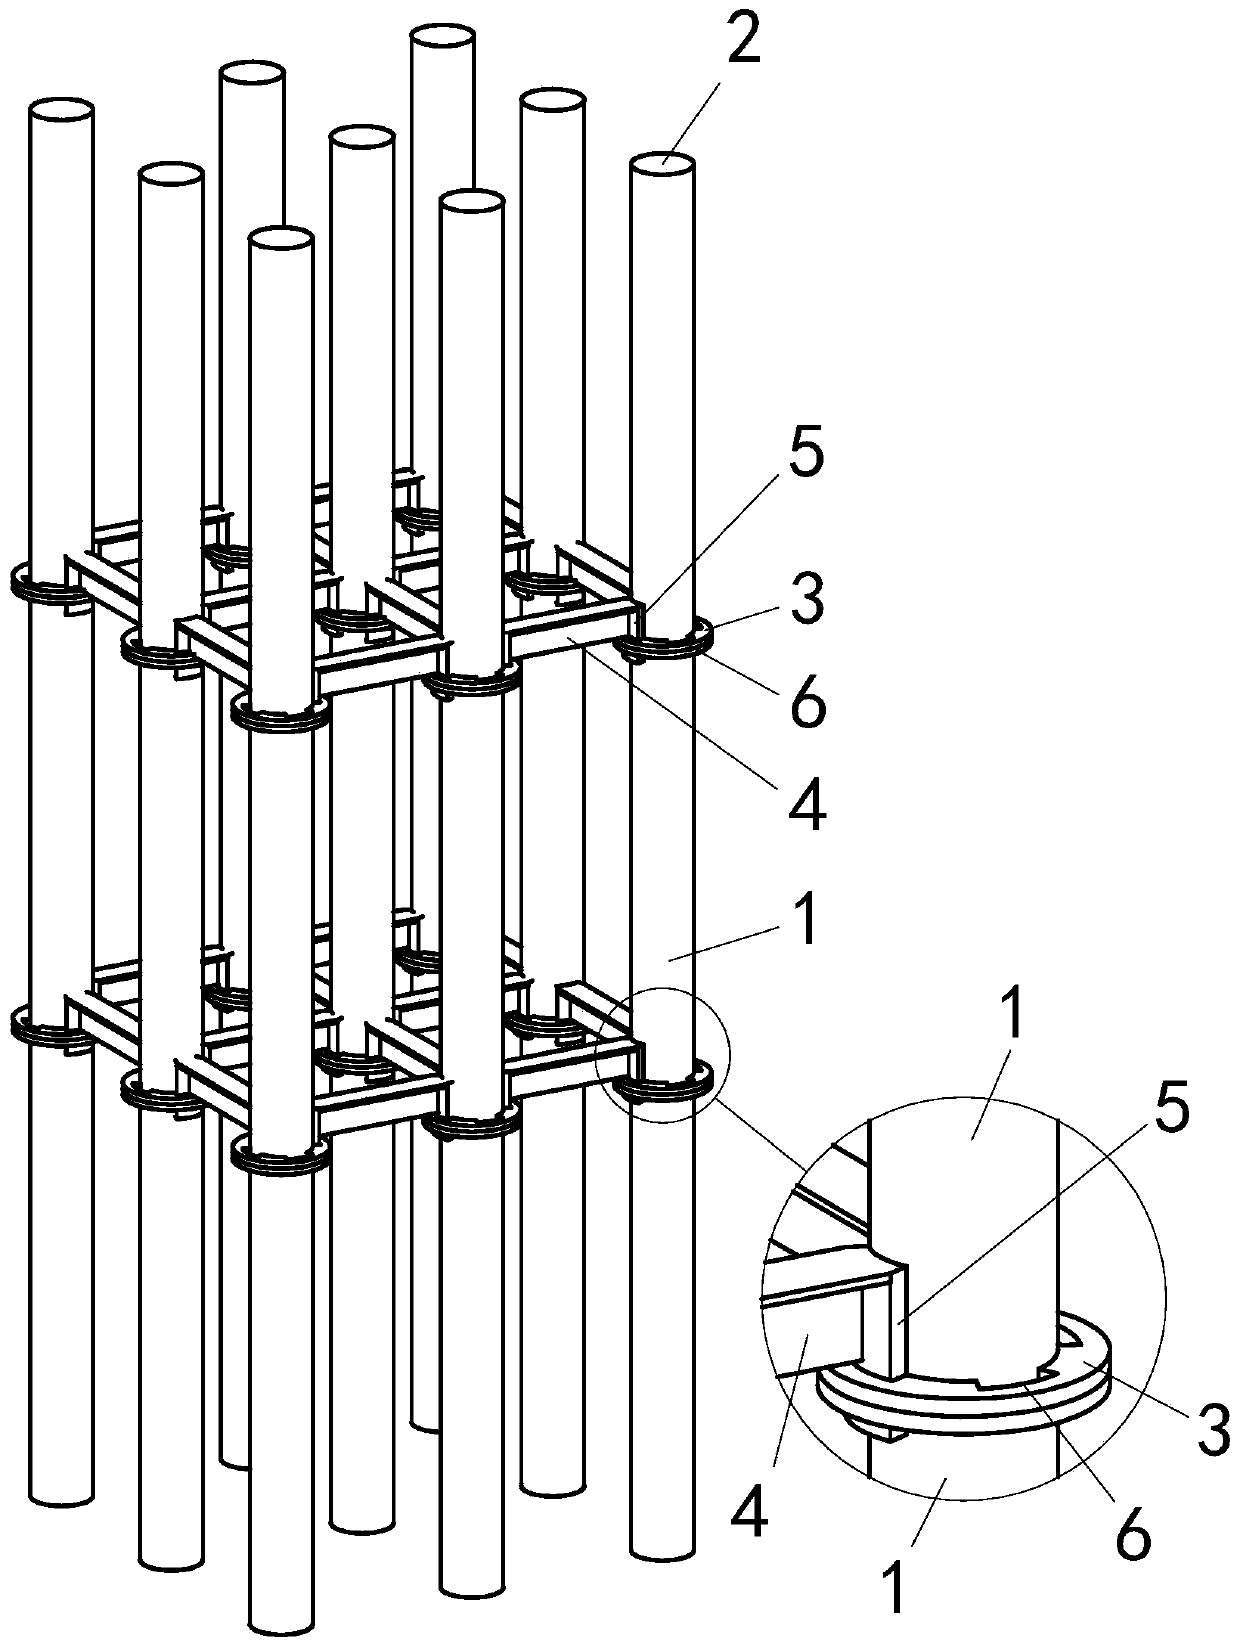 Rapid mounting structure of steel bar group